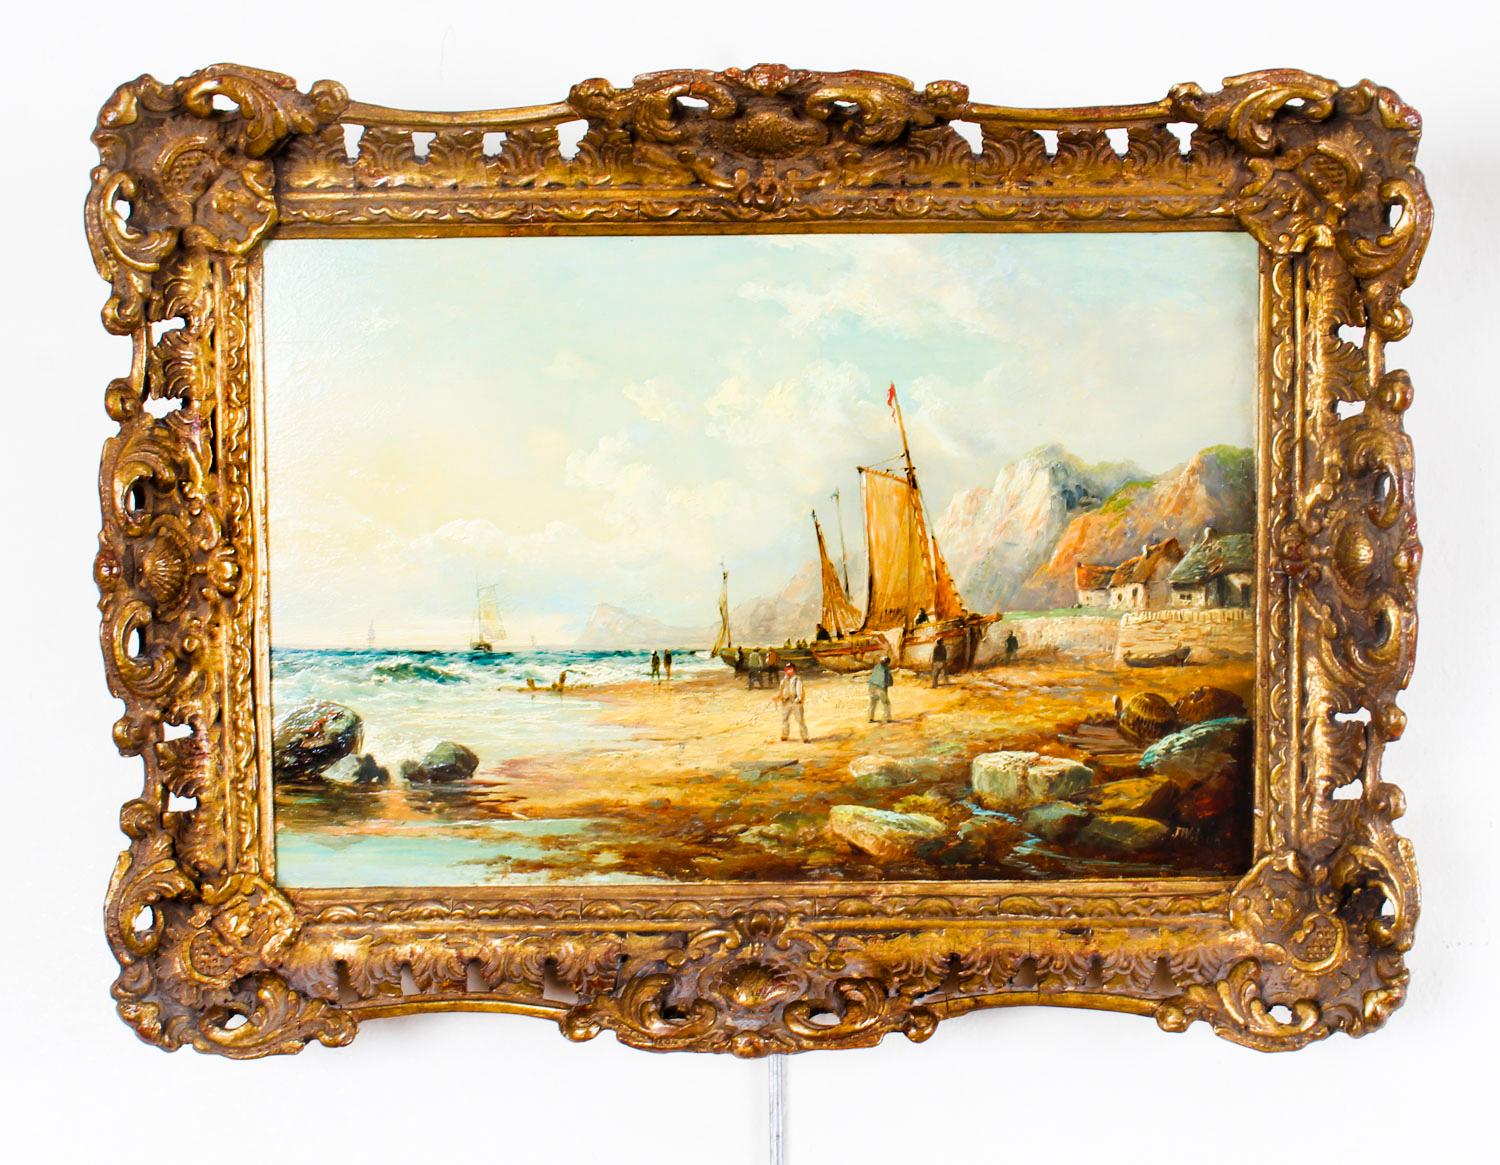 A superb pair of oil paintings by John James Wilson, (1818-1875) Fisher folk on the beach, each signed by the artist, dating from the third quarter of the 19th Century..

One painting features a group of fisherman in the act of pushing the boat